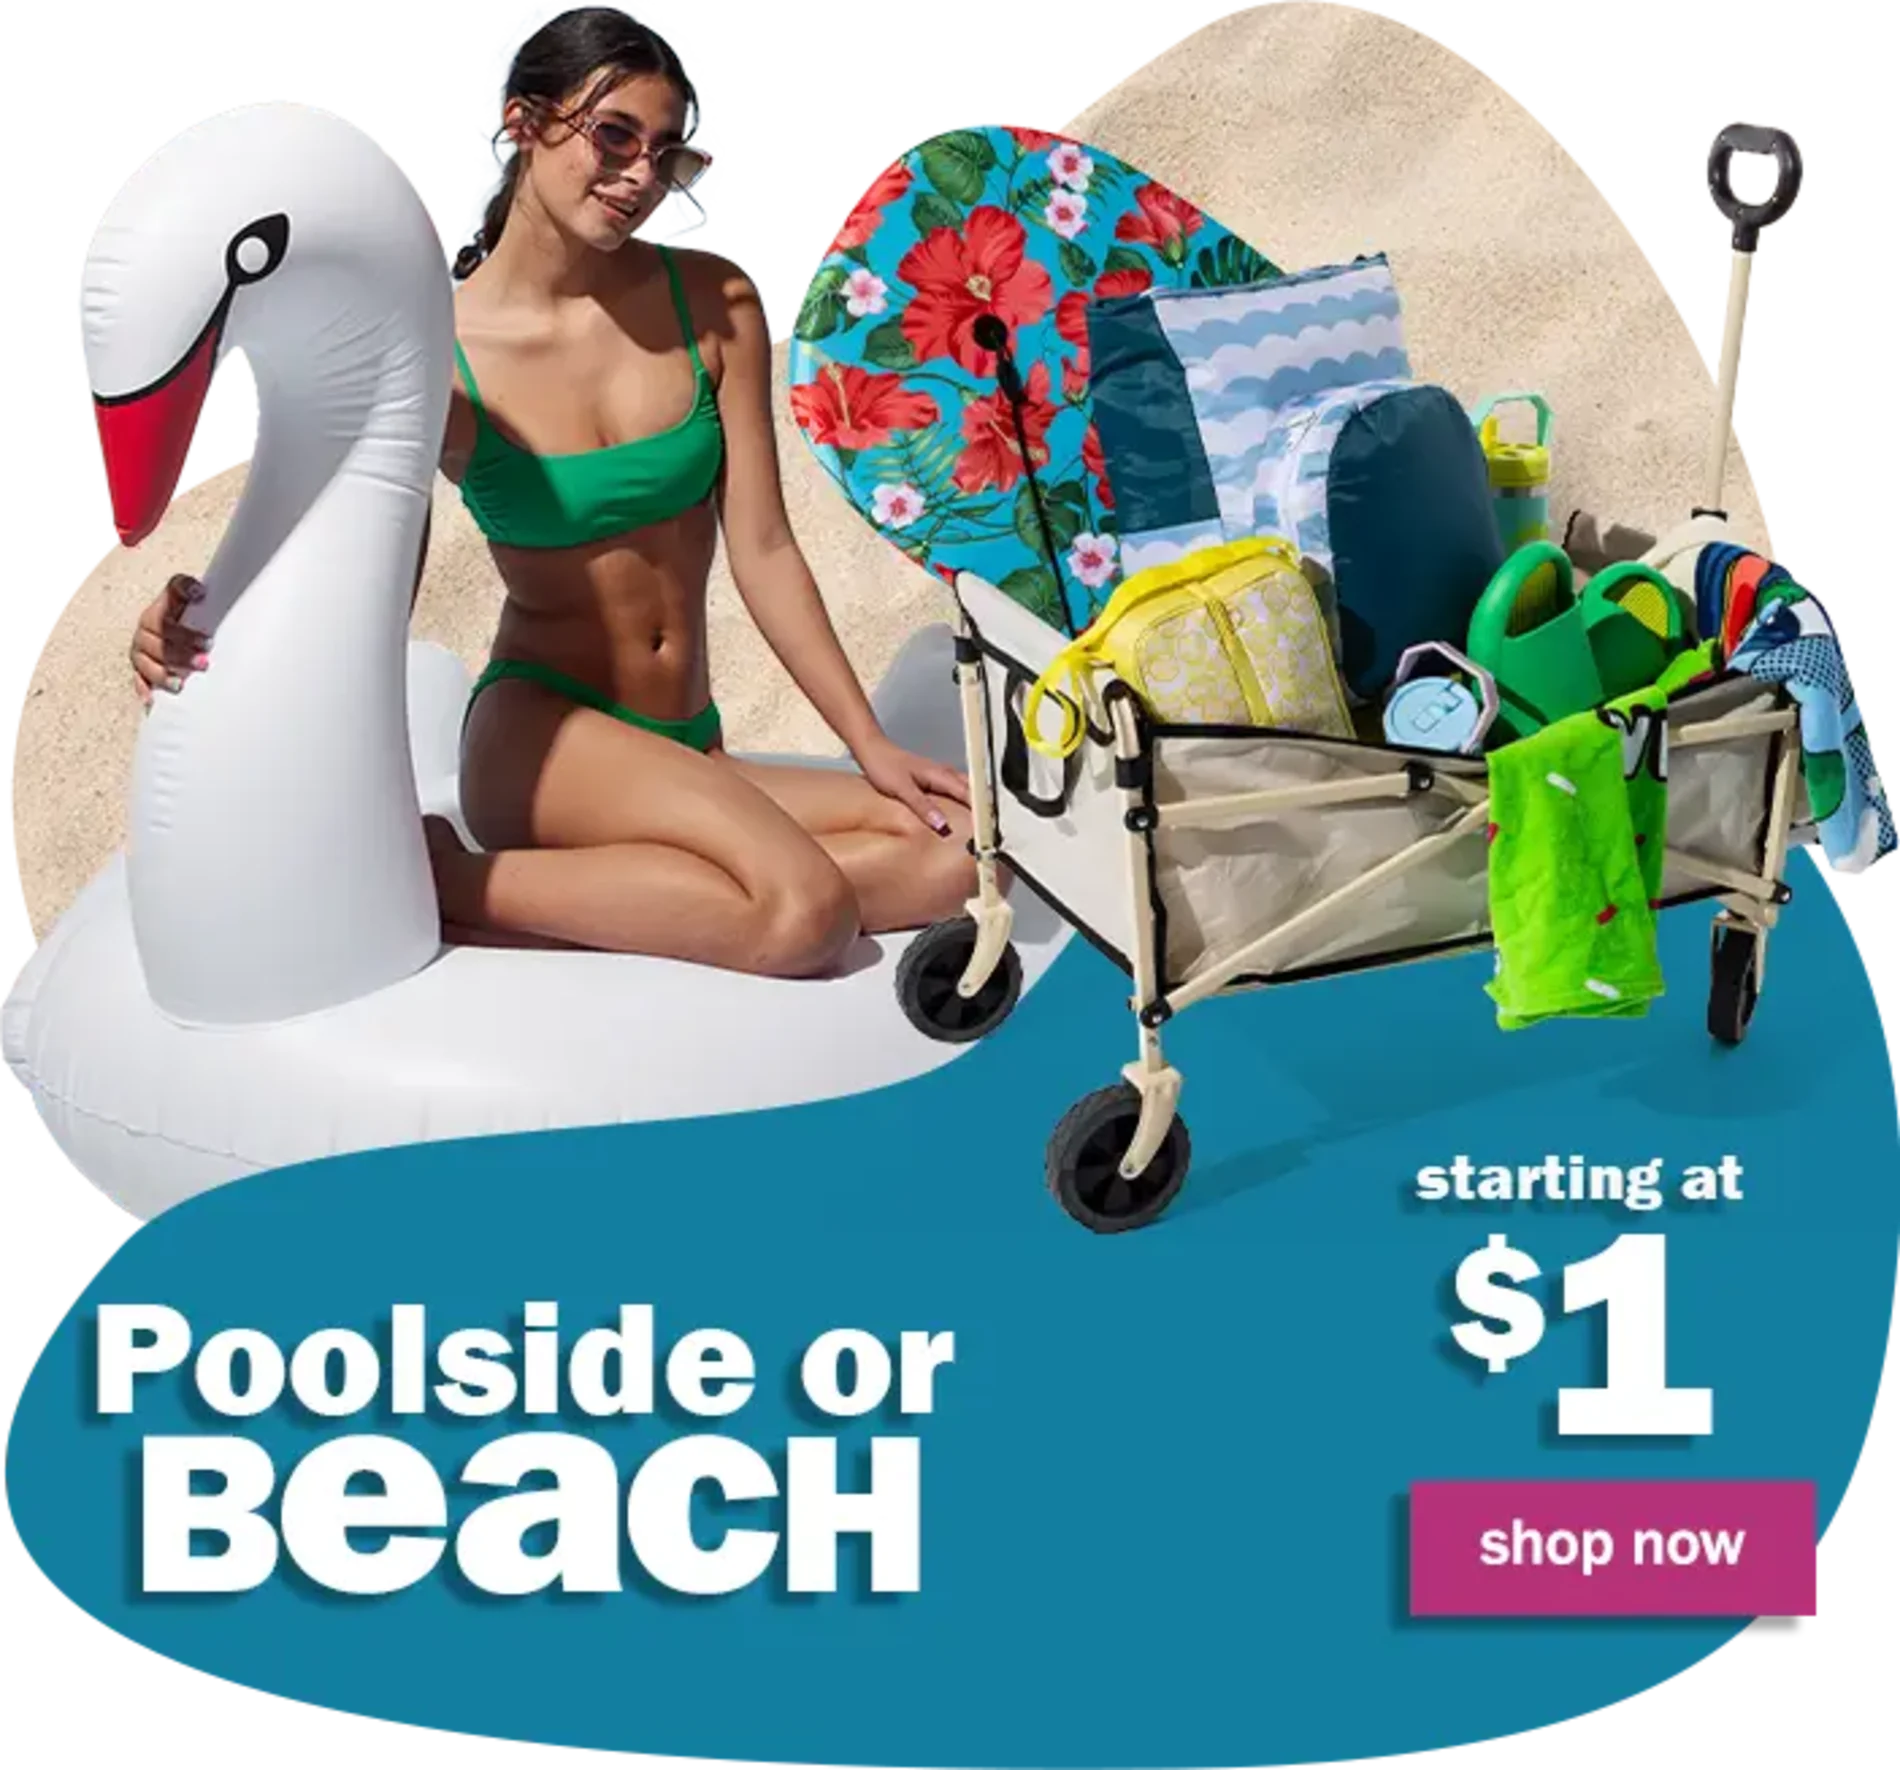 Poolside or Beach. Starting at $1. Shop Now.